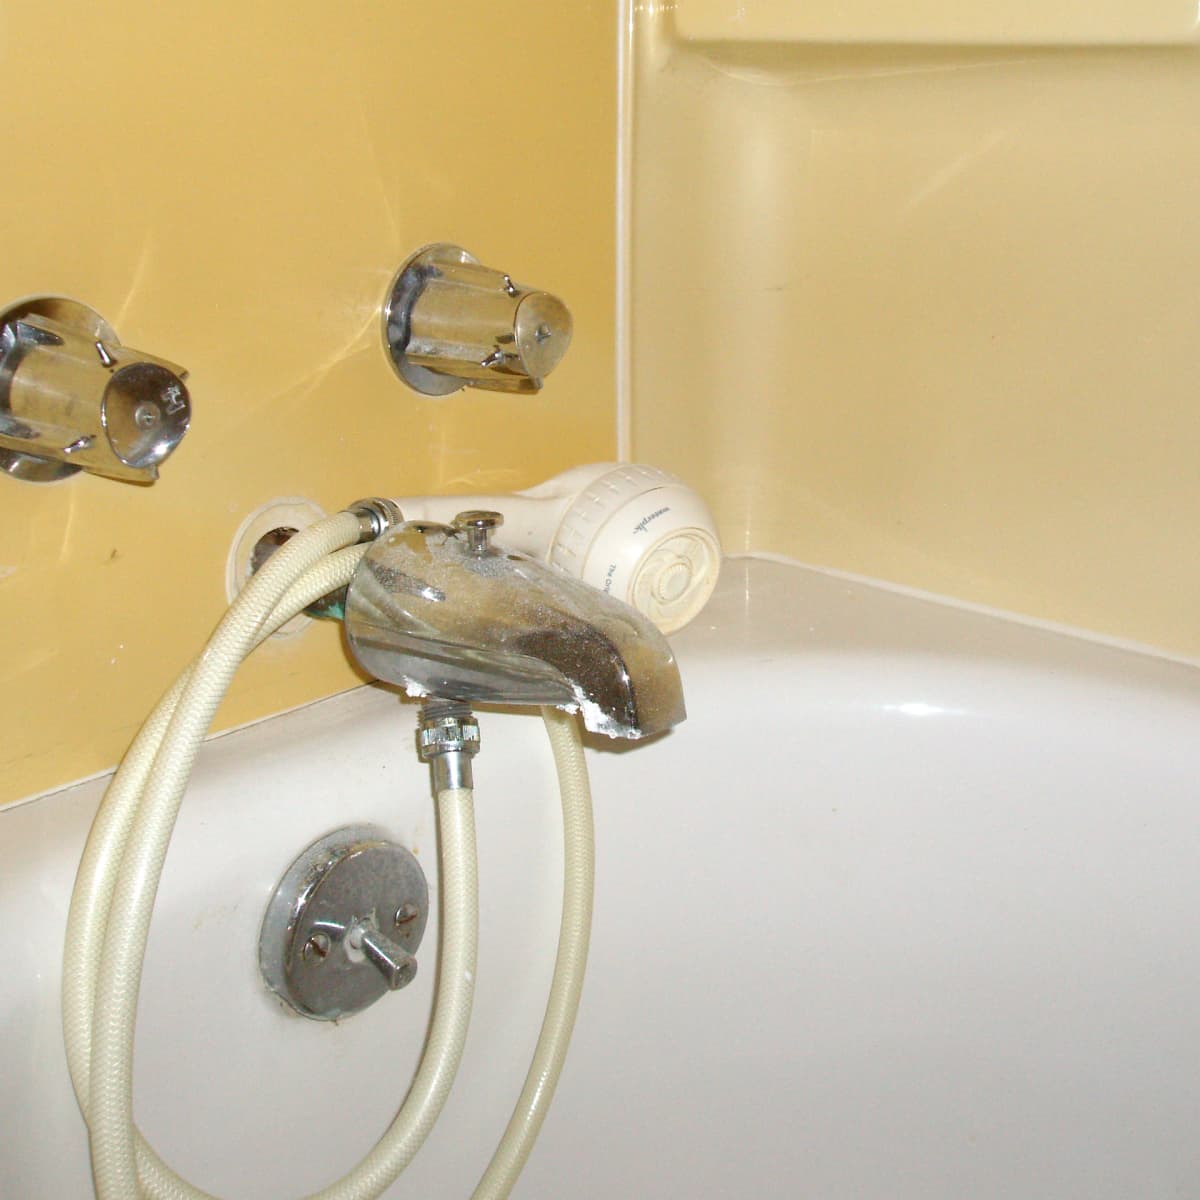 Wall Mounted And Handheld Showerheads, How To Switch From Bathtub Shower